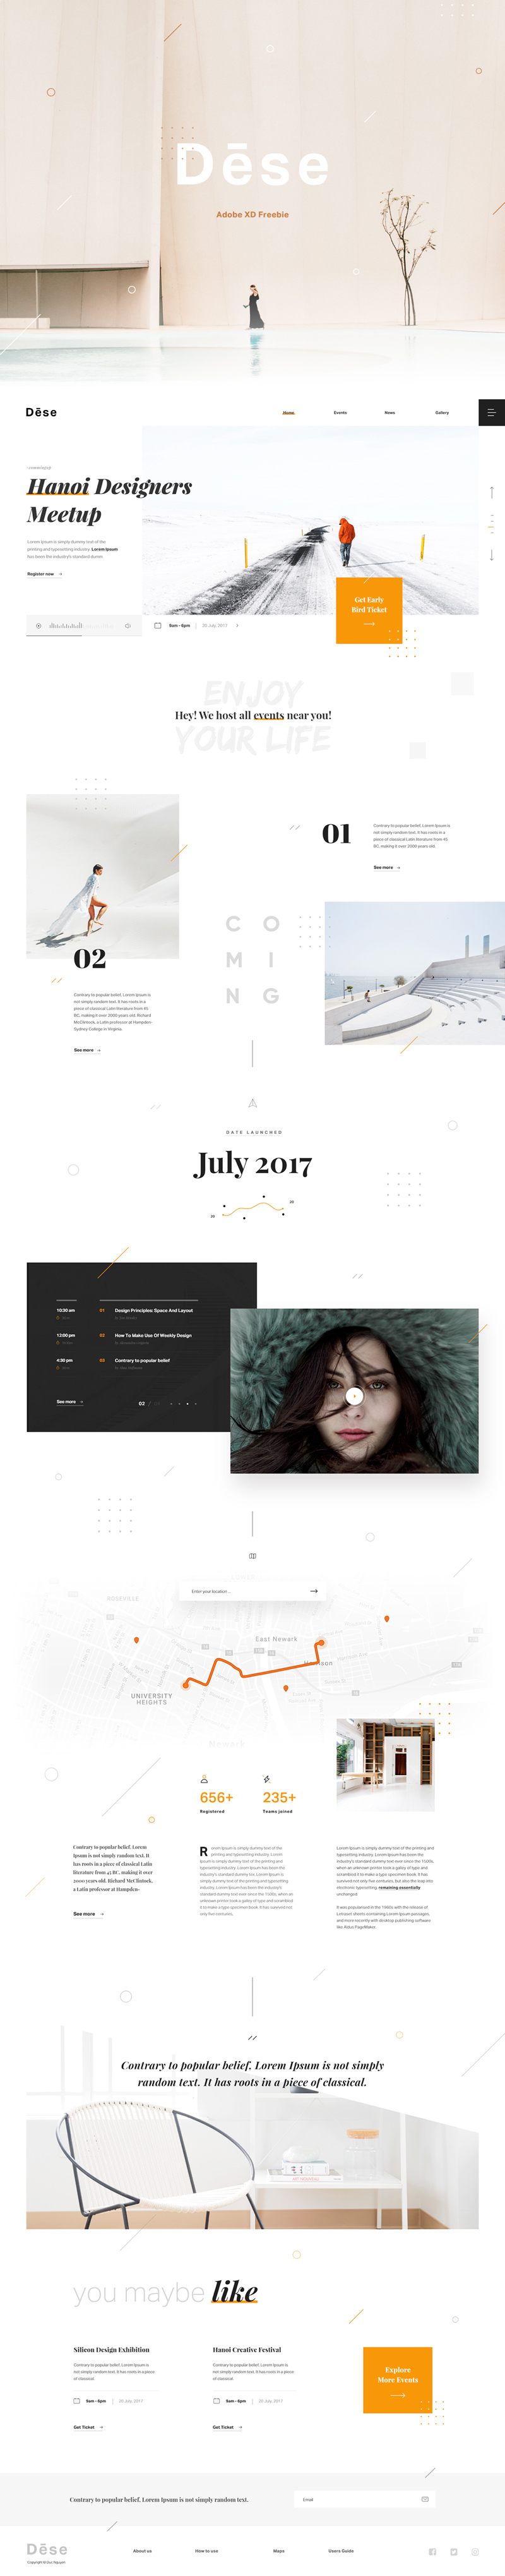 Dese Landing Page Adobe XD Template